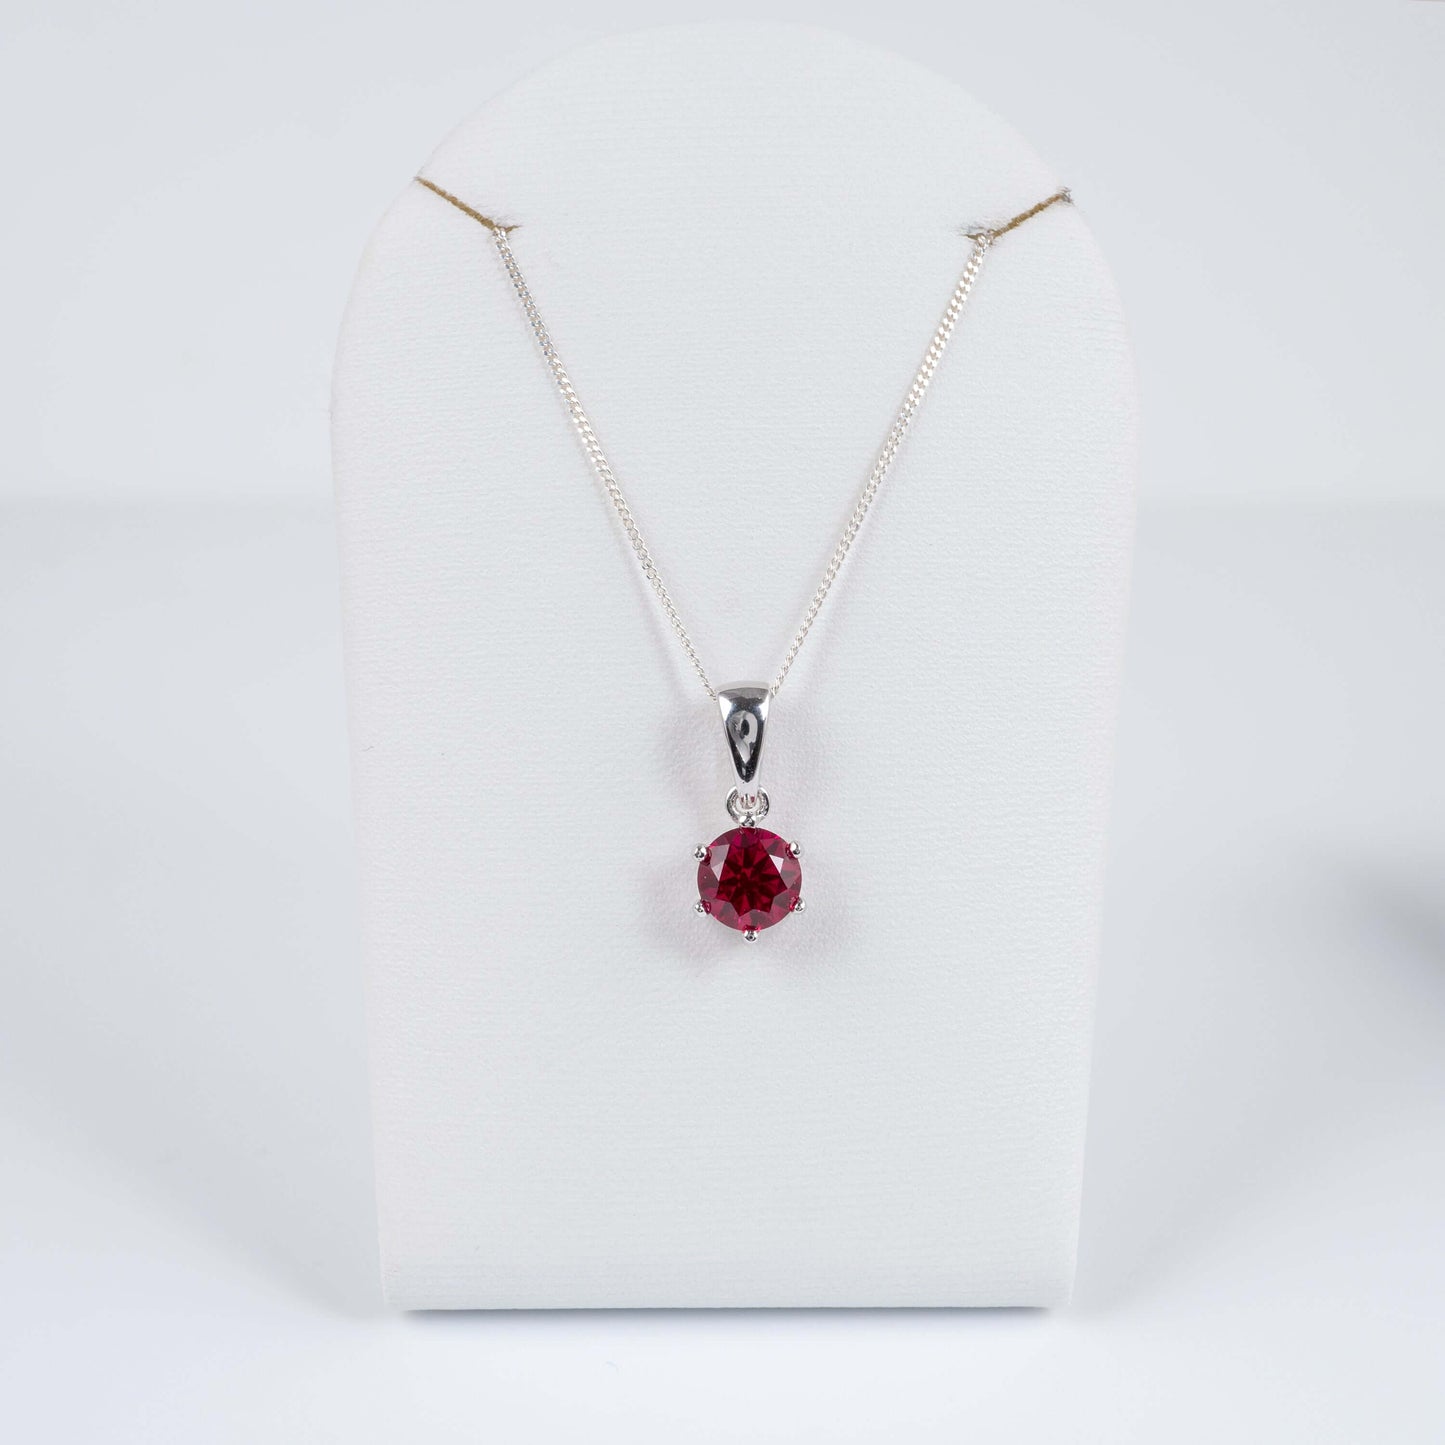 Silver pendant with rhodium plating and ruby gemstone